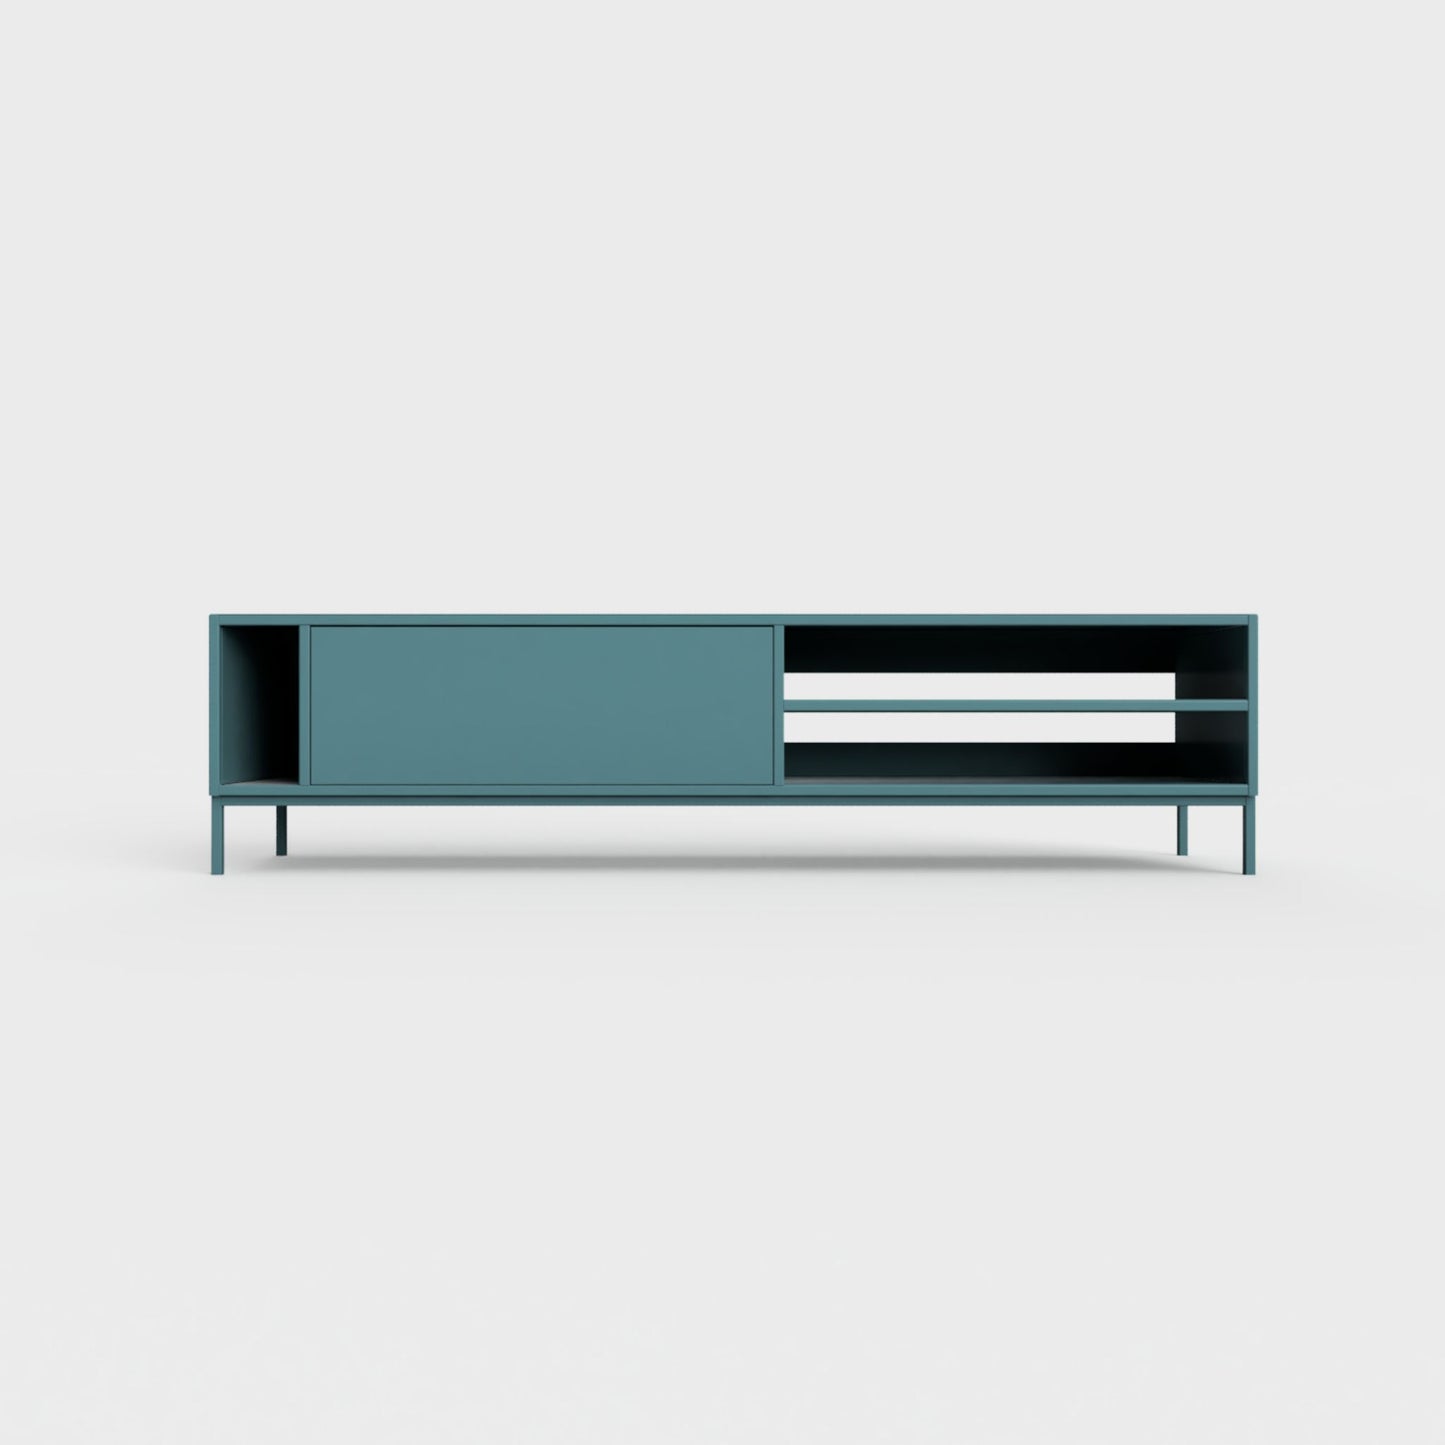 Prunus 03 Lowboard in turquoise blue-green color, powder-coated steel, elegant and modern piece of furniture for your living room